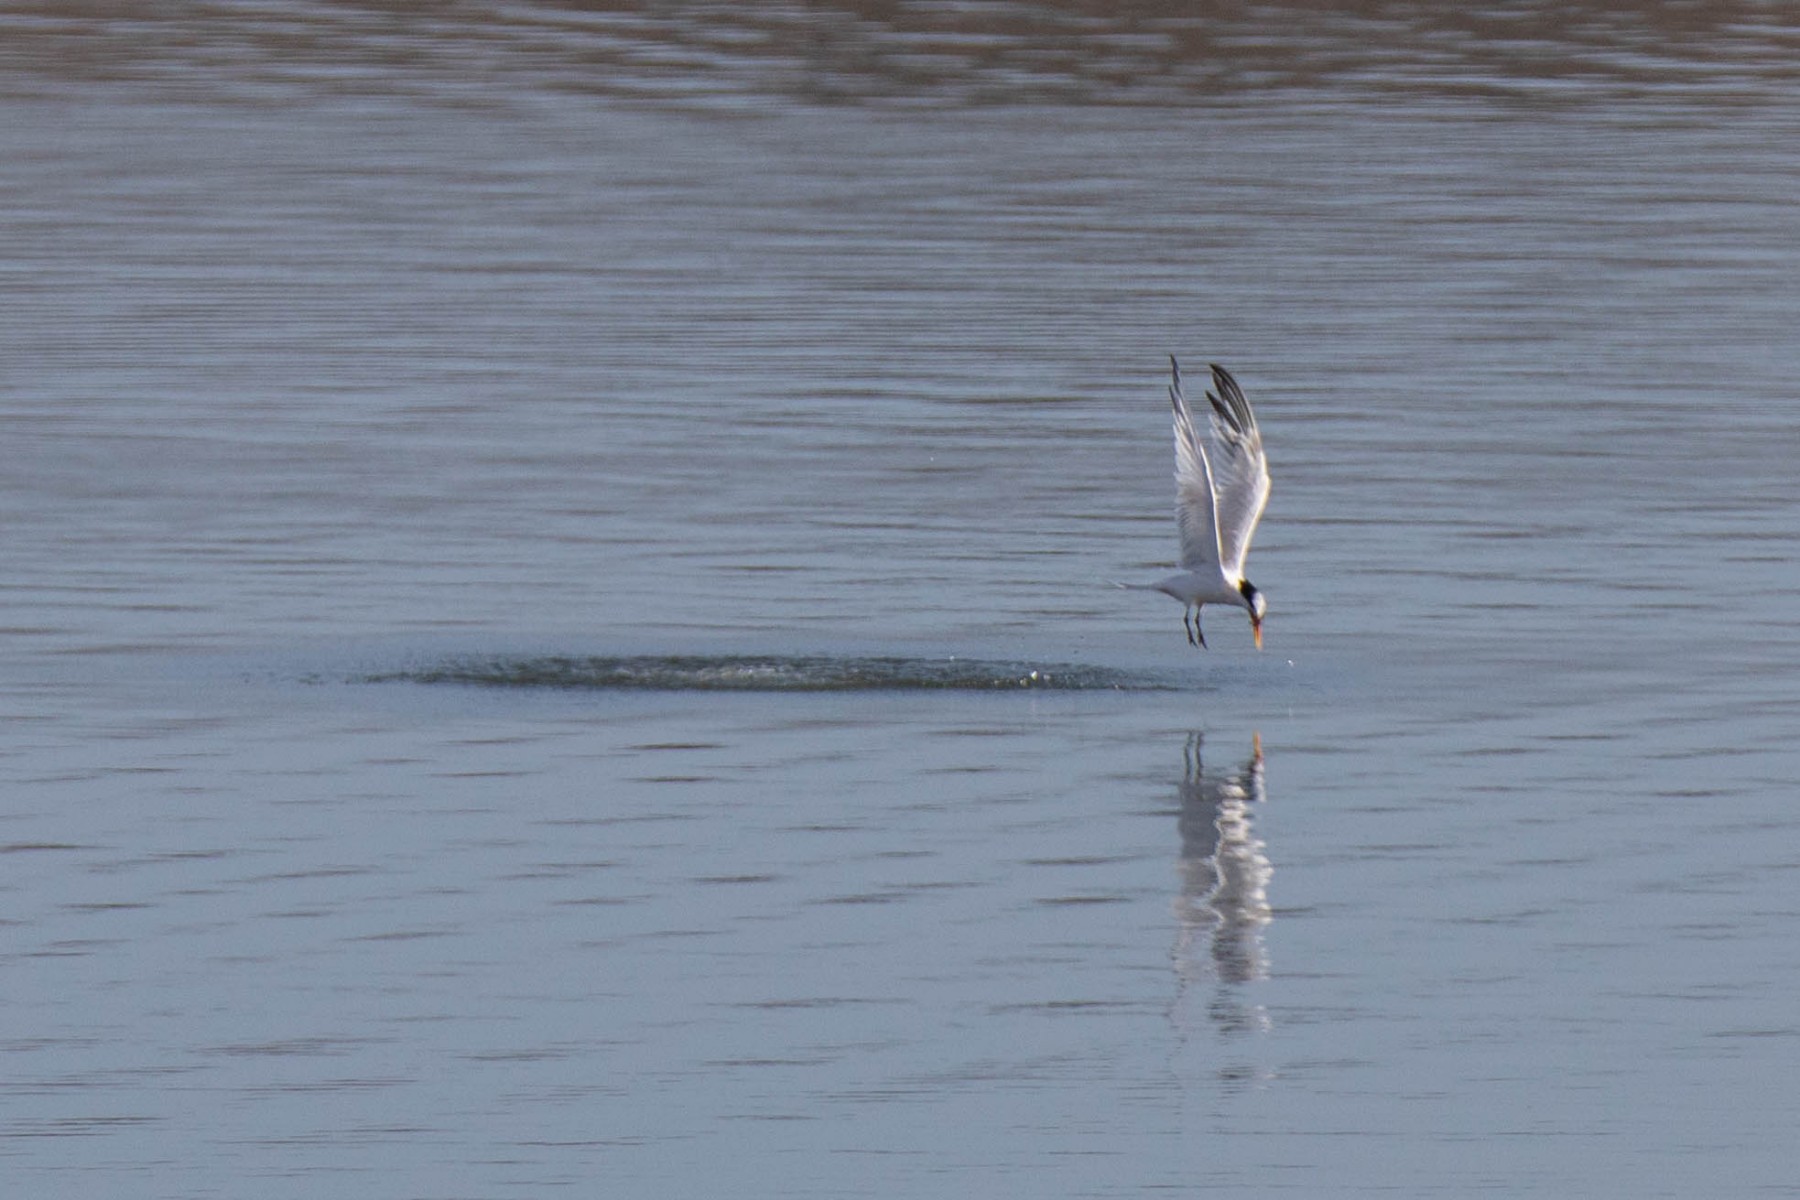 Elegant Tern emerging--unsuccessfully this time--from the water.